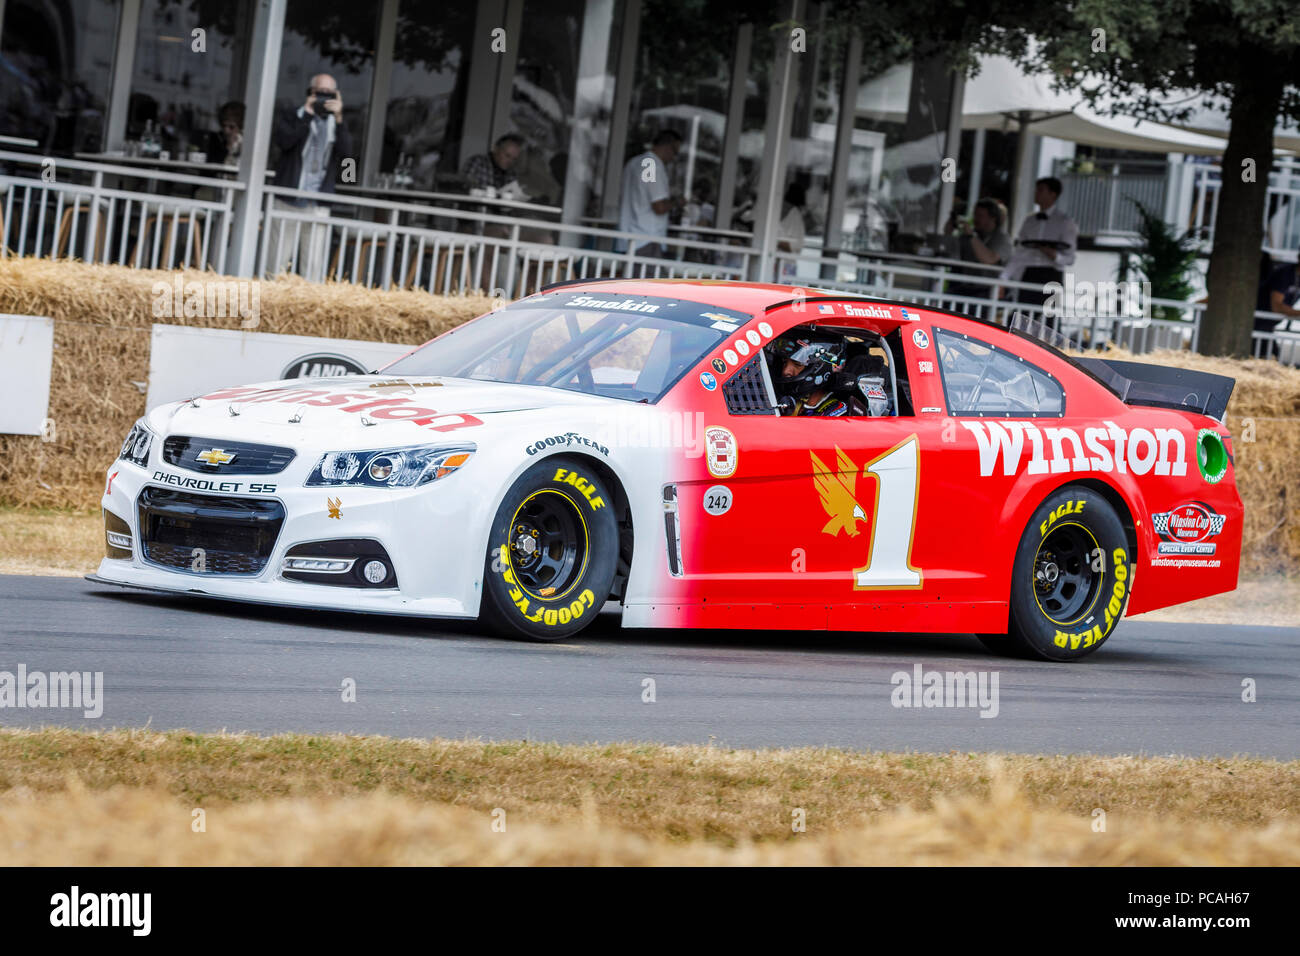 2014 Chevrolet SS NASCAR with driver Will Spencer at the 2018 Goodwood Festival of Speed, Sussex, UK. Stock Photo